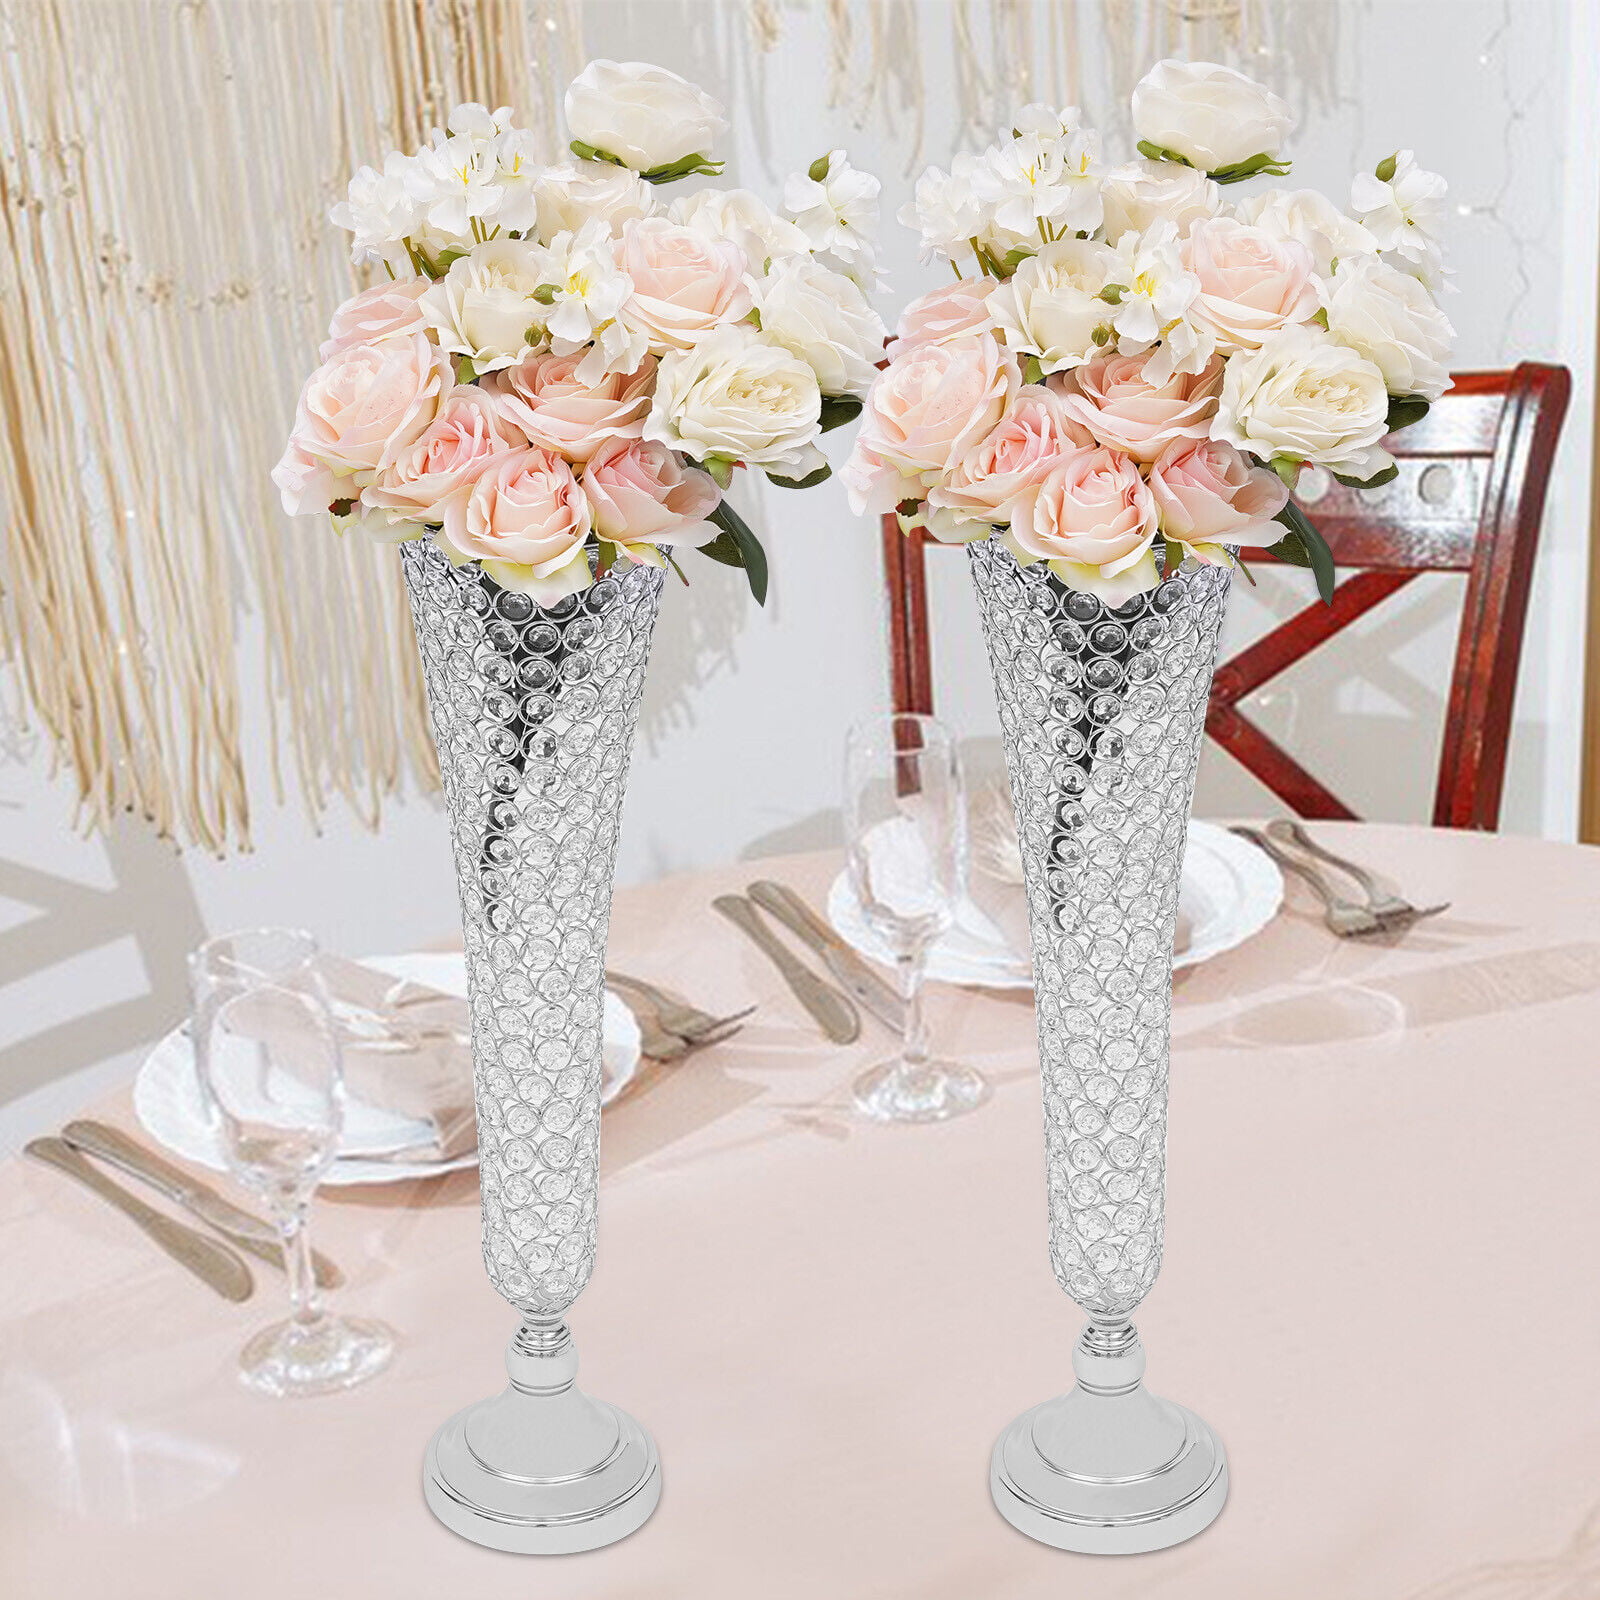 10Pcs Crystal Flower Stand Wedding Centerpieces For Tables 26CM-35CM Tall  Silver